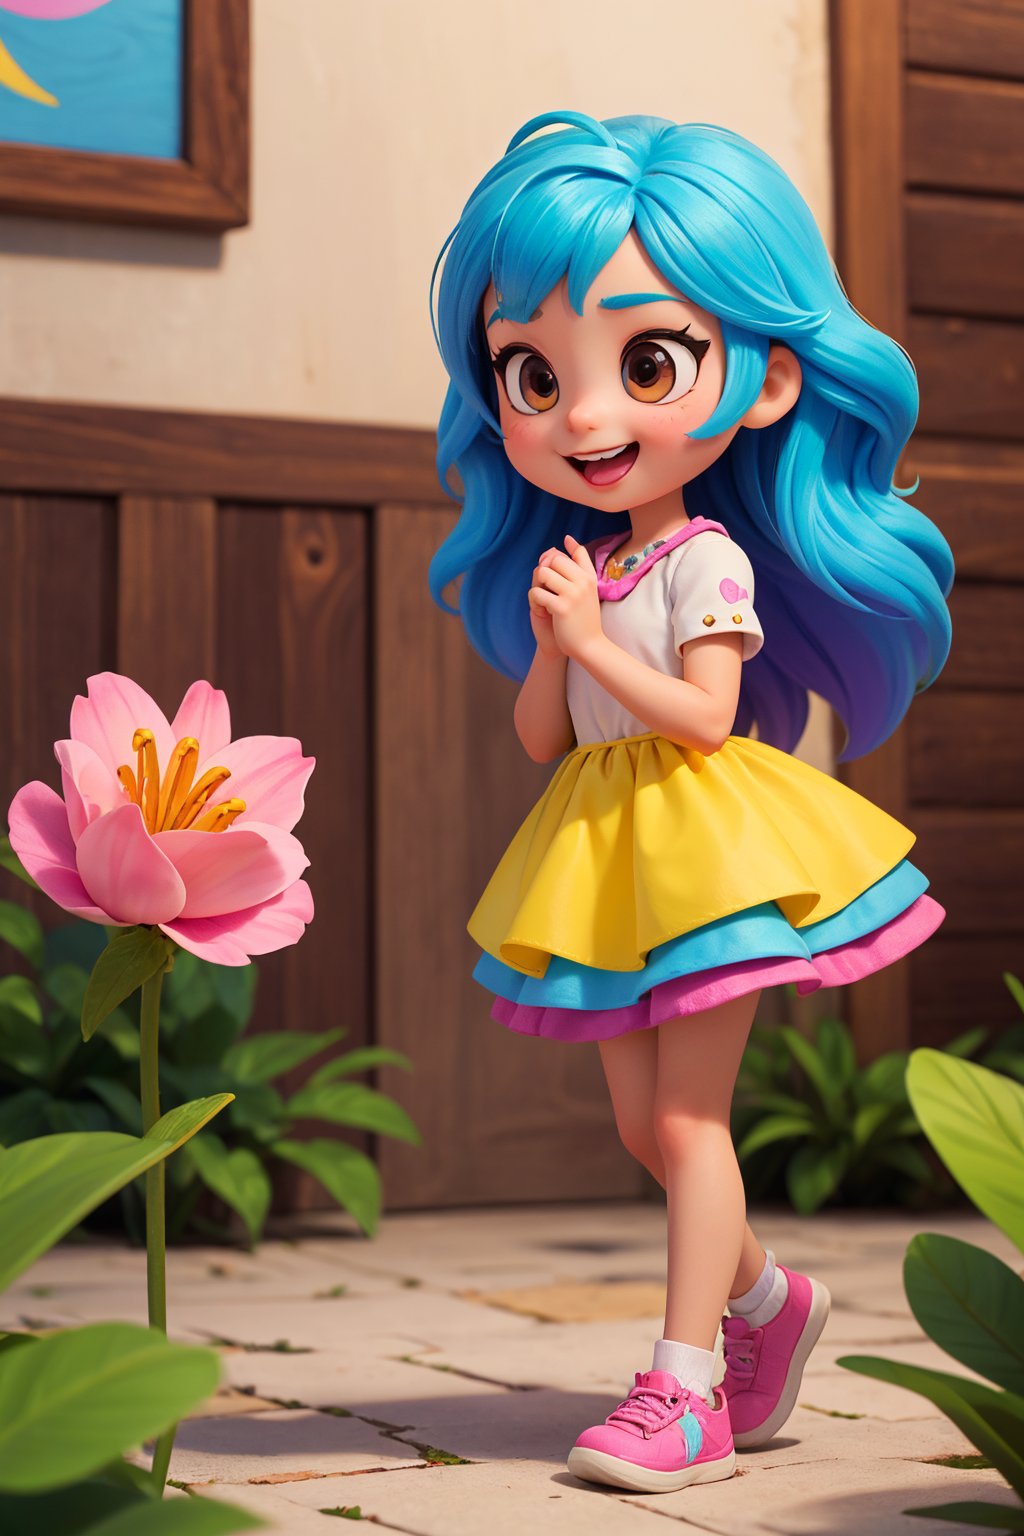 (Child character:1.2),  (Colorful personality:1.3),  Meet Lily,  a cheerful little girl with a vibrant personality and a unique twist – her hair shimmers in all the colors of the rainbow. Her warm brown eyes radiate curiosity and kindness,  making her a truly endearing character with a captivating appearance.